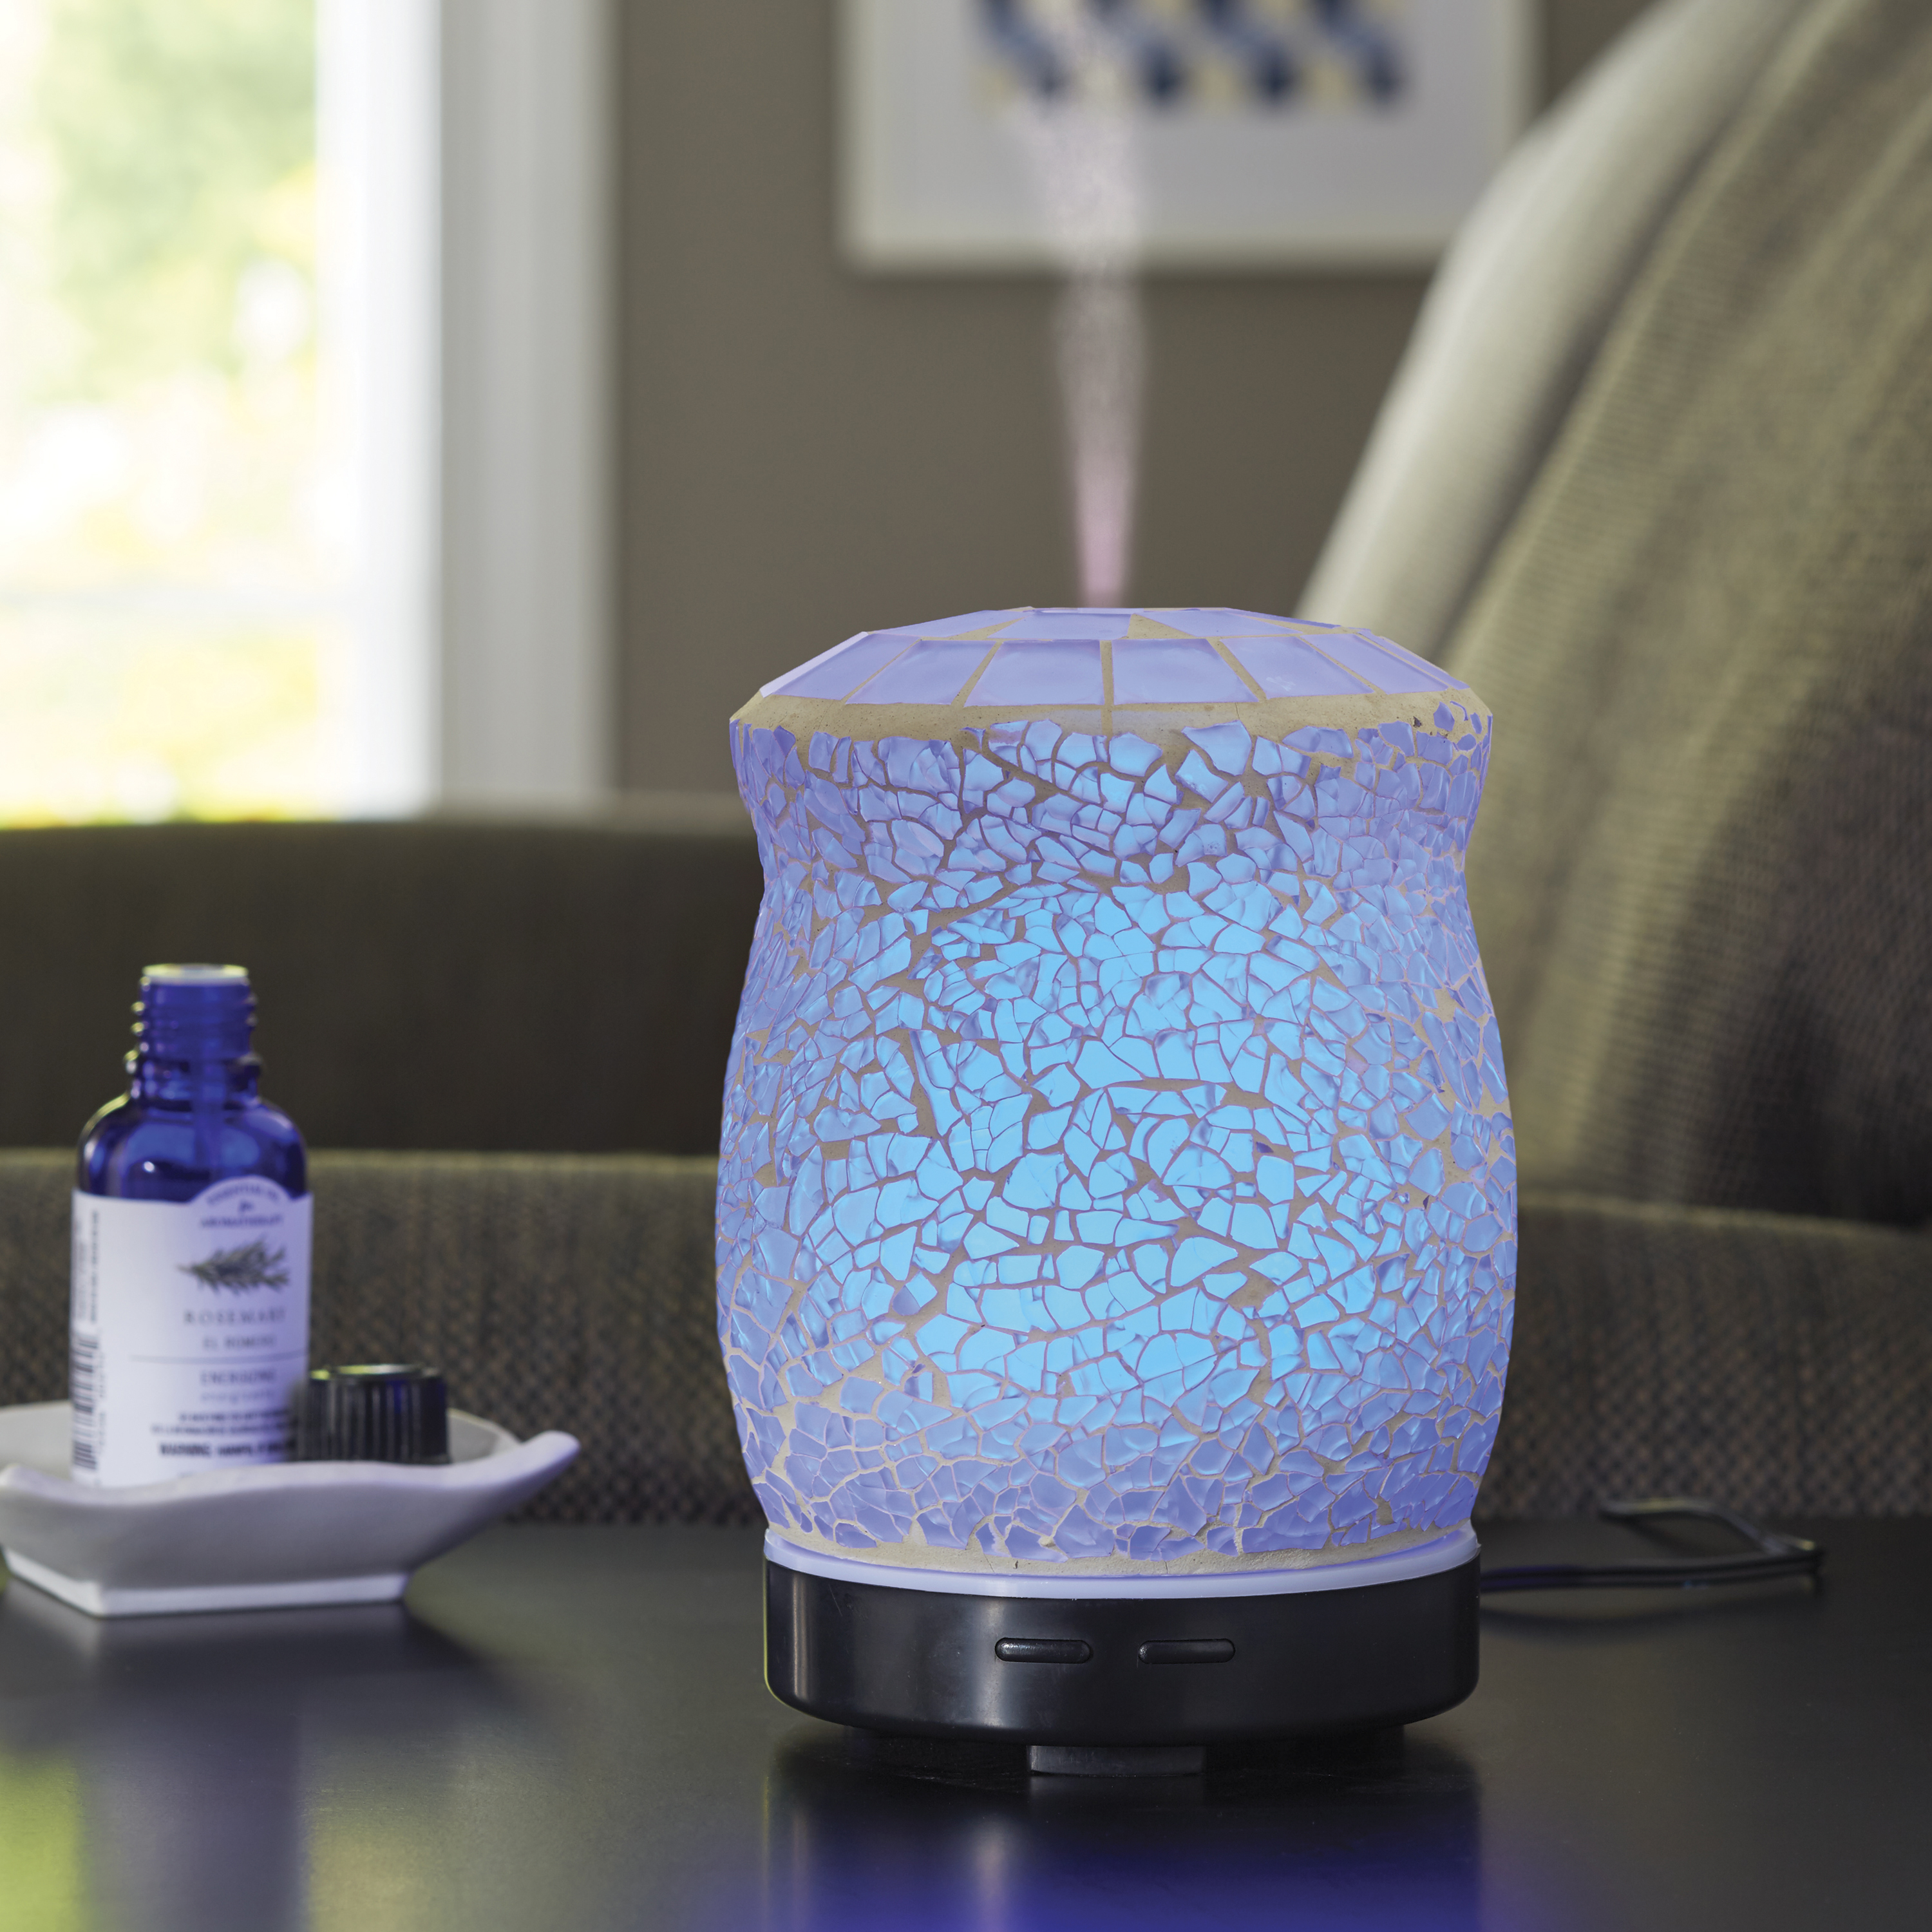 Better Homes & Gardens 100 mL Crackled Mosaic Essential Oil Diffuser - image 1 of 9